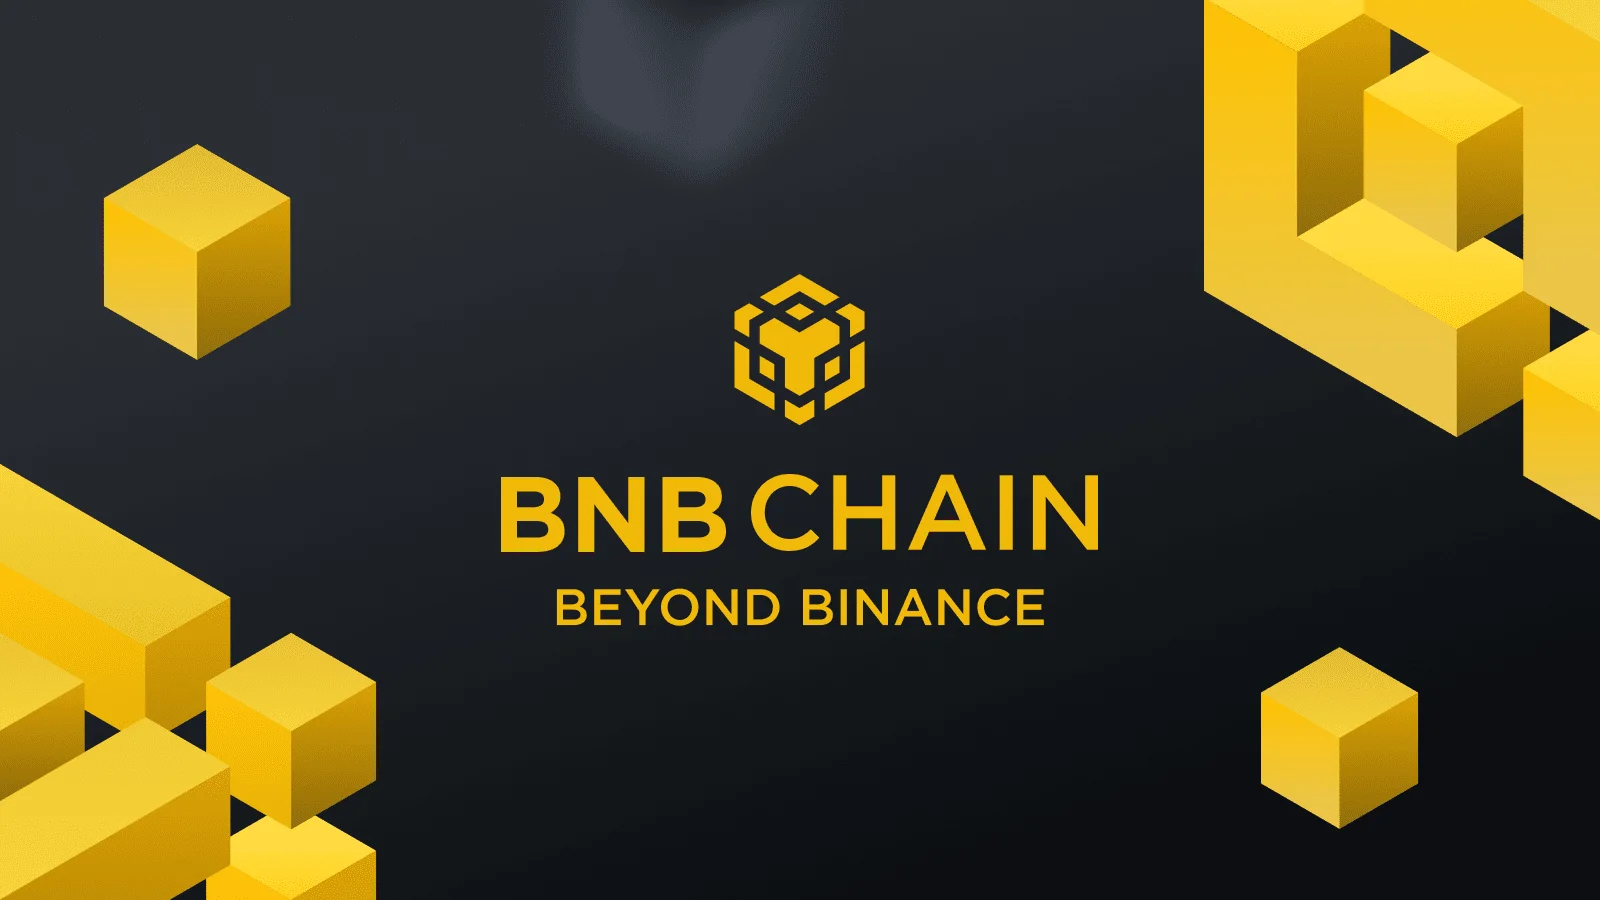 Should you build a new project on BNB chain?